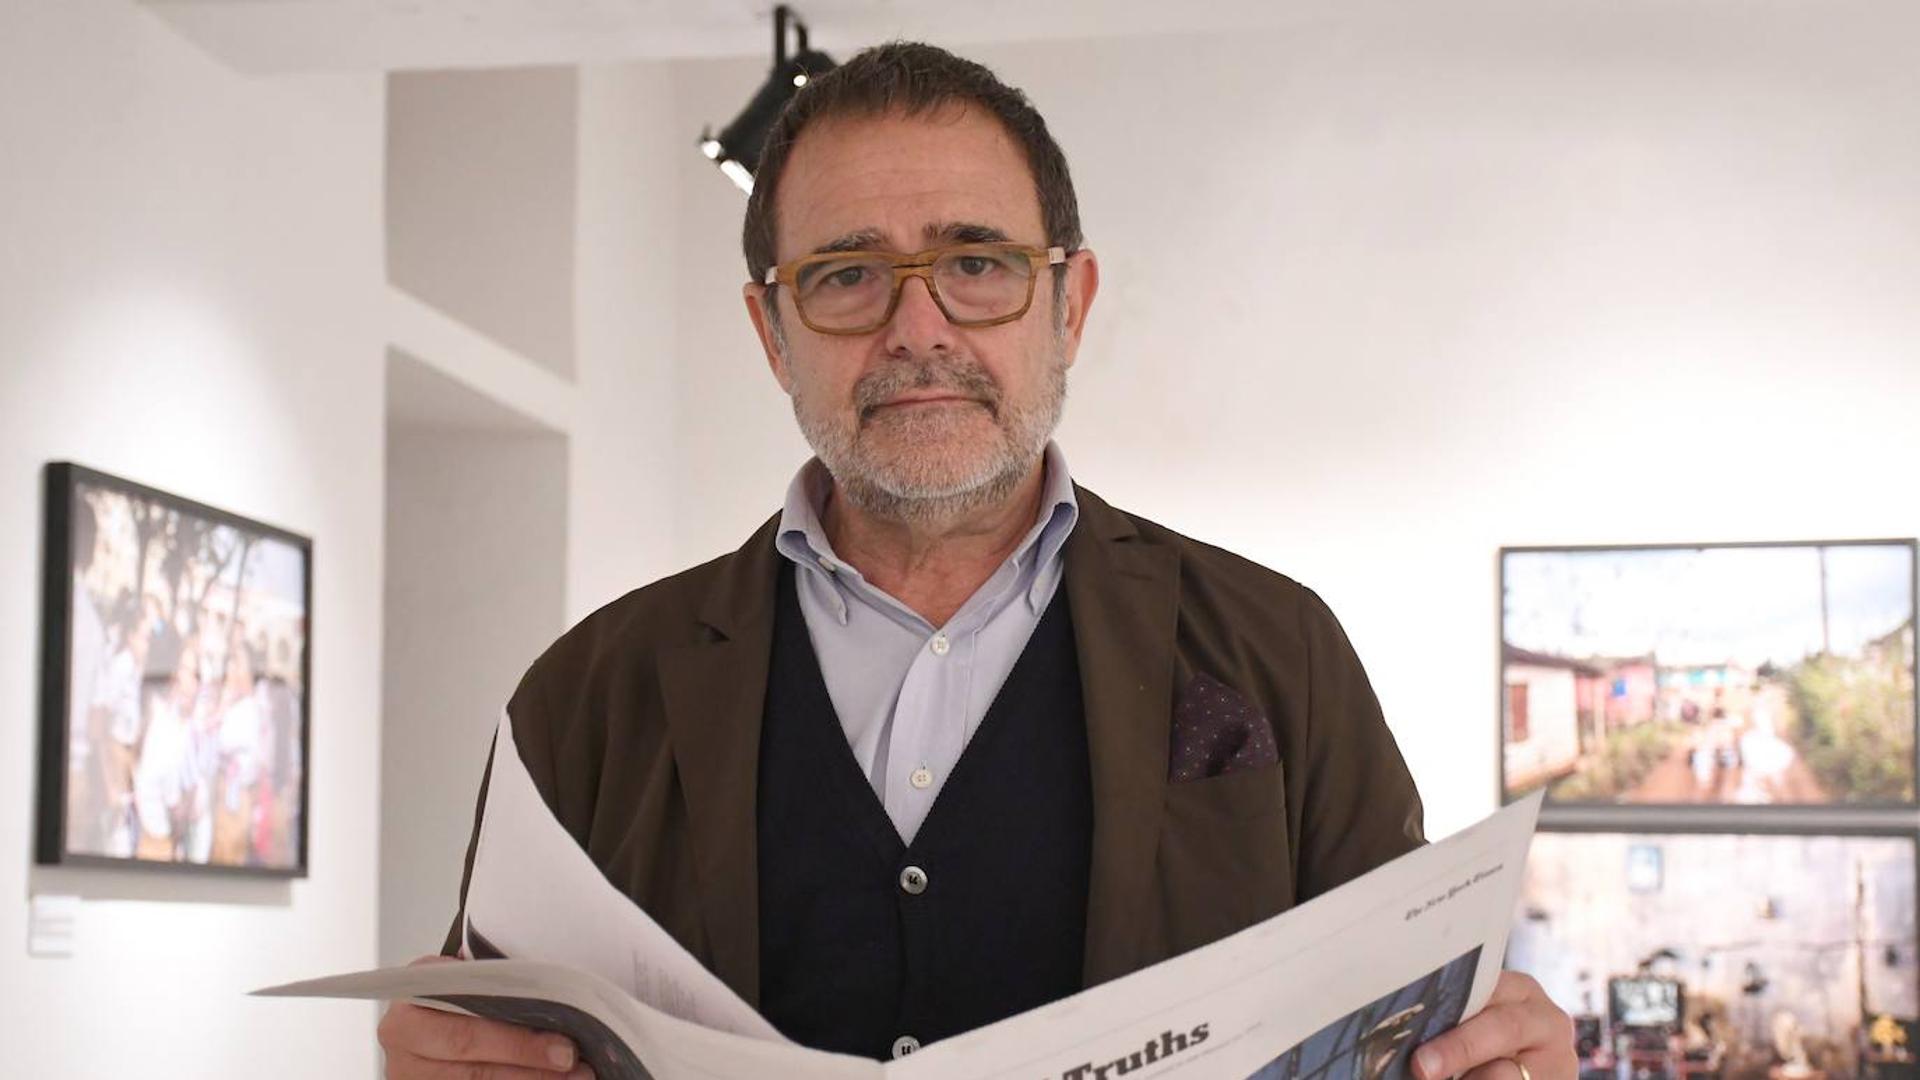 Alberto Anaut, founder of La Fábrica and promoter of PHotoEspaña, dies